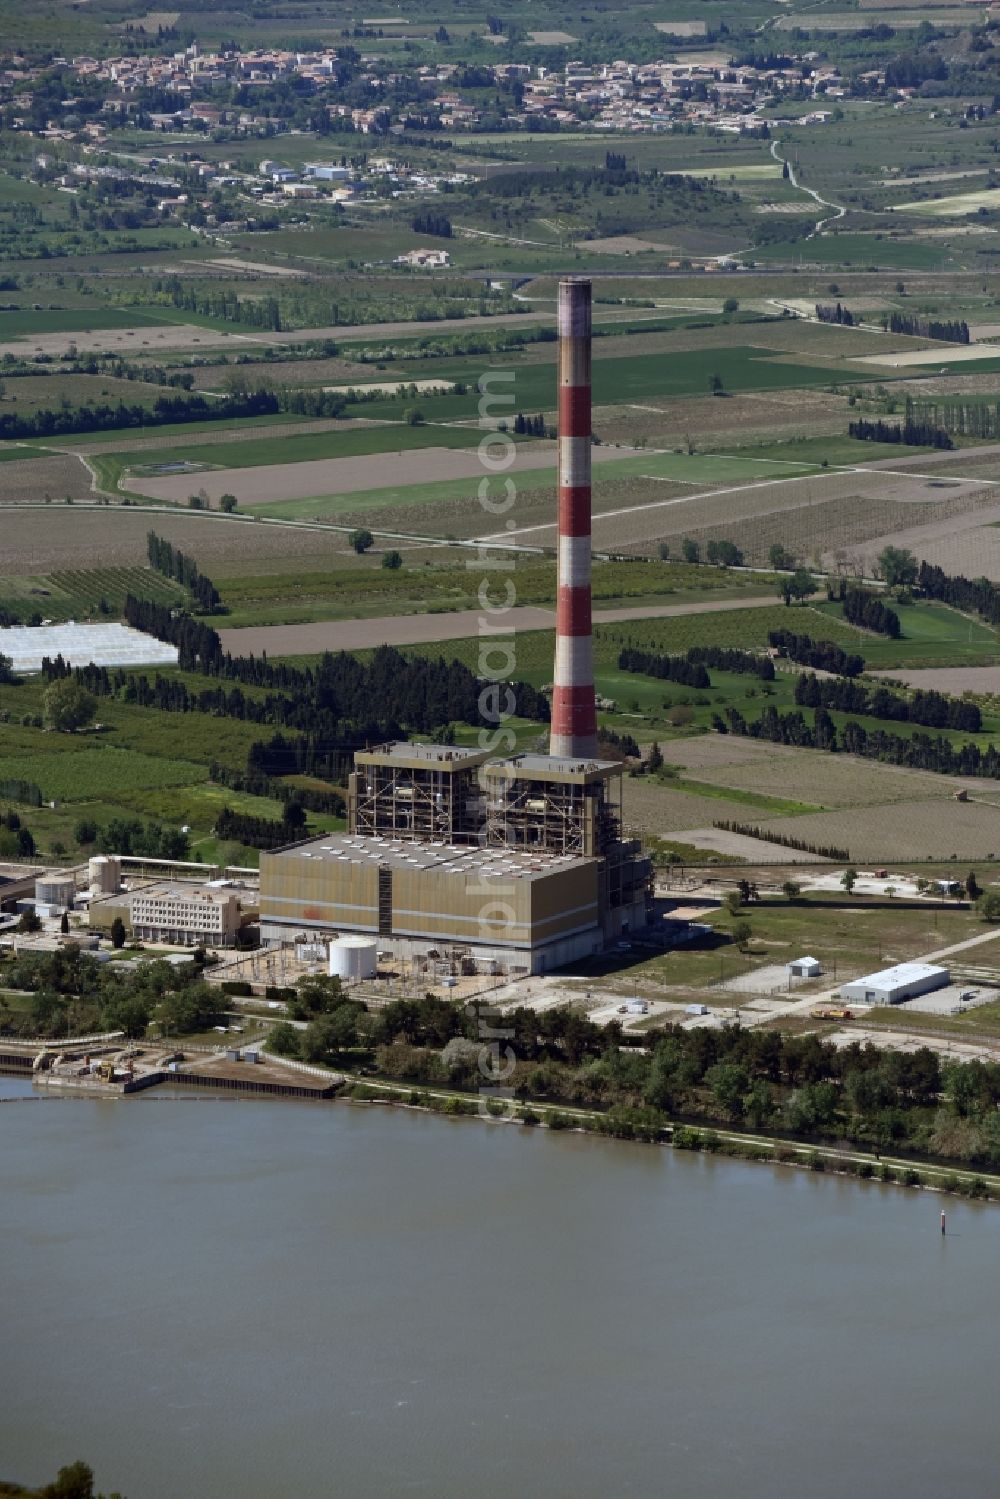 Aerial image Aramon - Building remains of the reactor units and facilities of the NPP nuclear power plant in Aramon in Languedoc-Roussillon Midi-Pyrenees, France